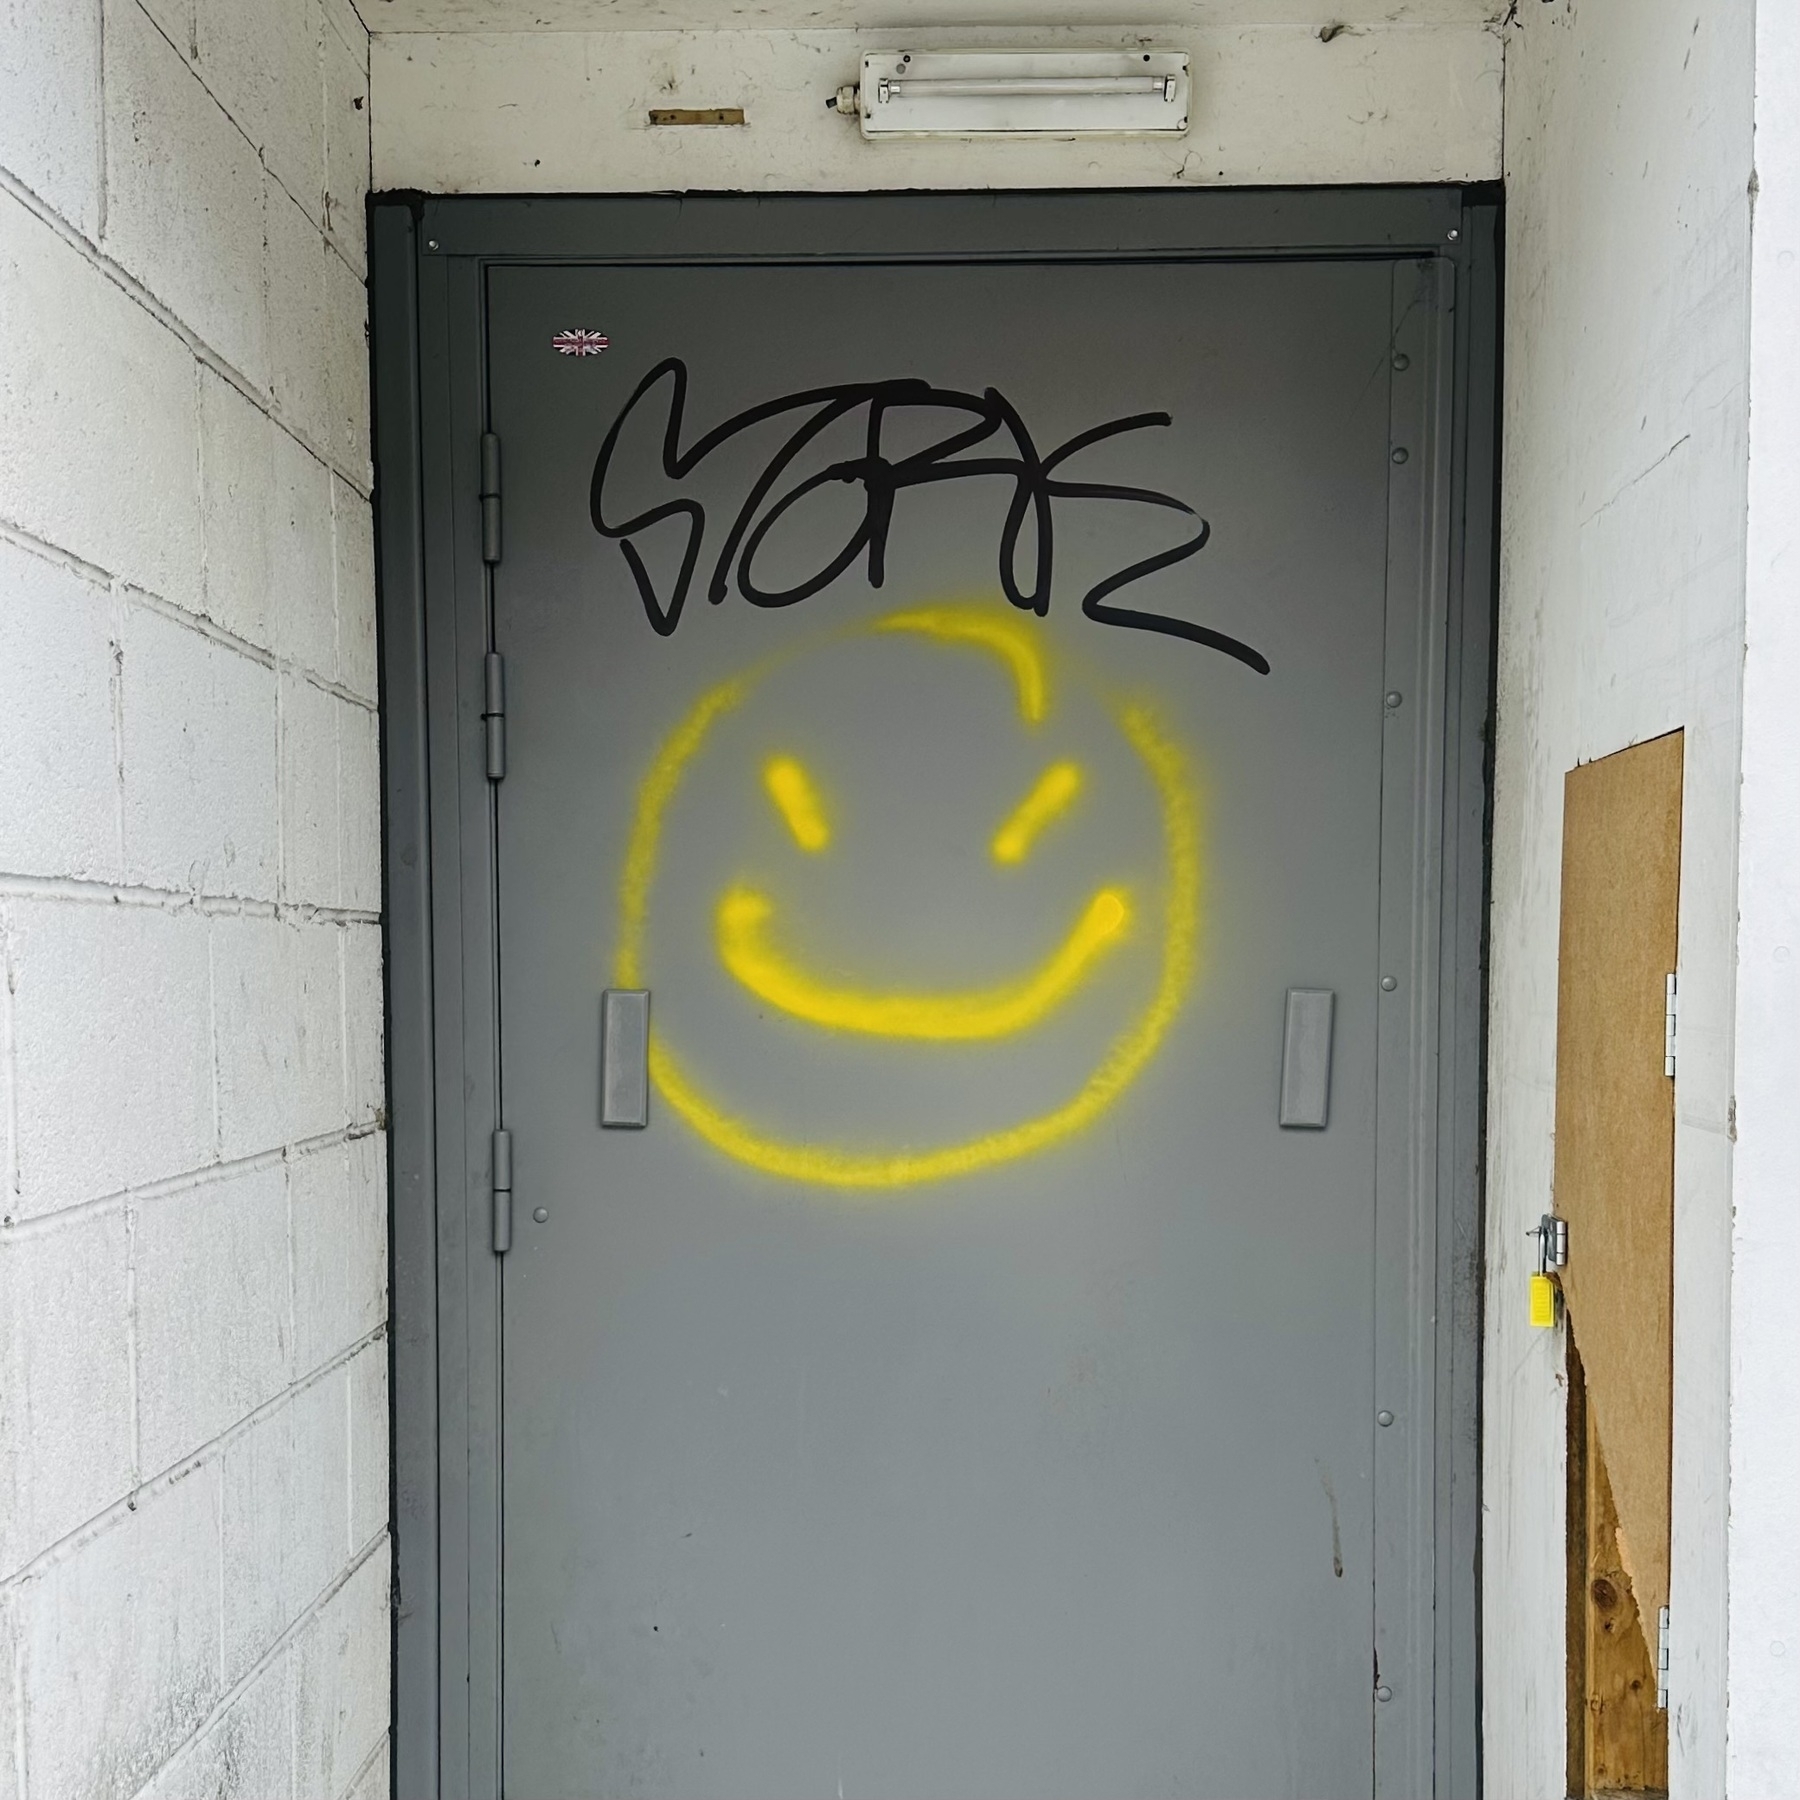 A smiley face in yellow paint on a grey metal door.